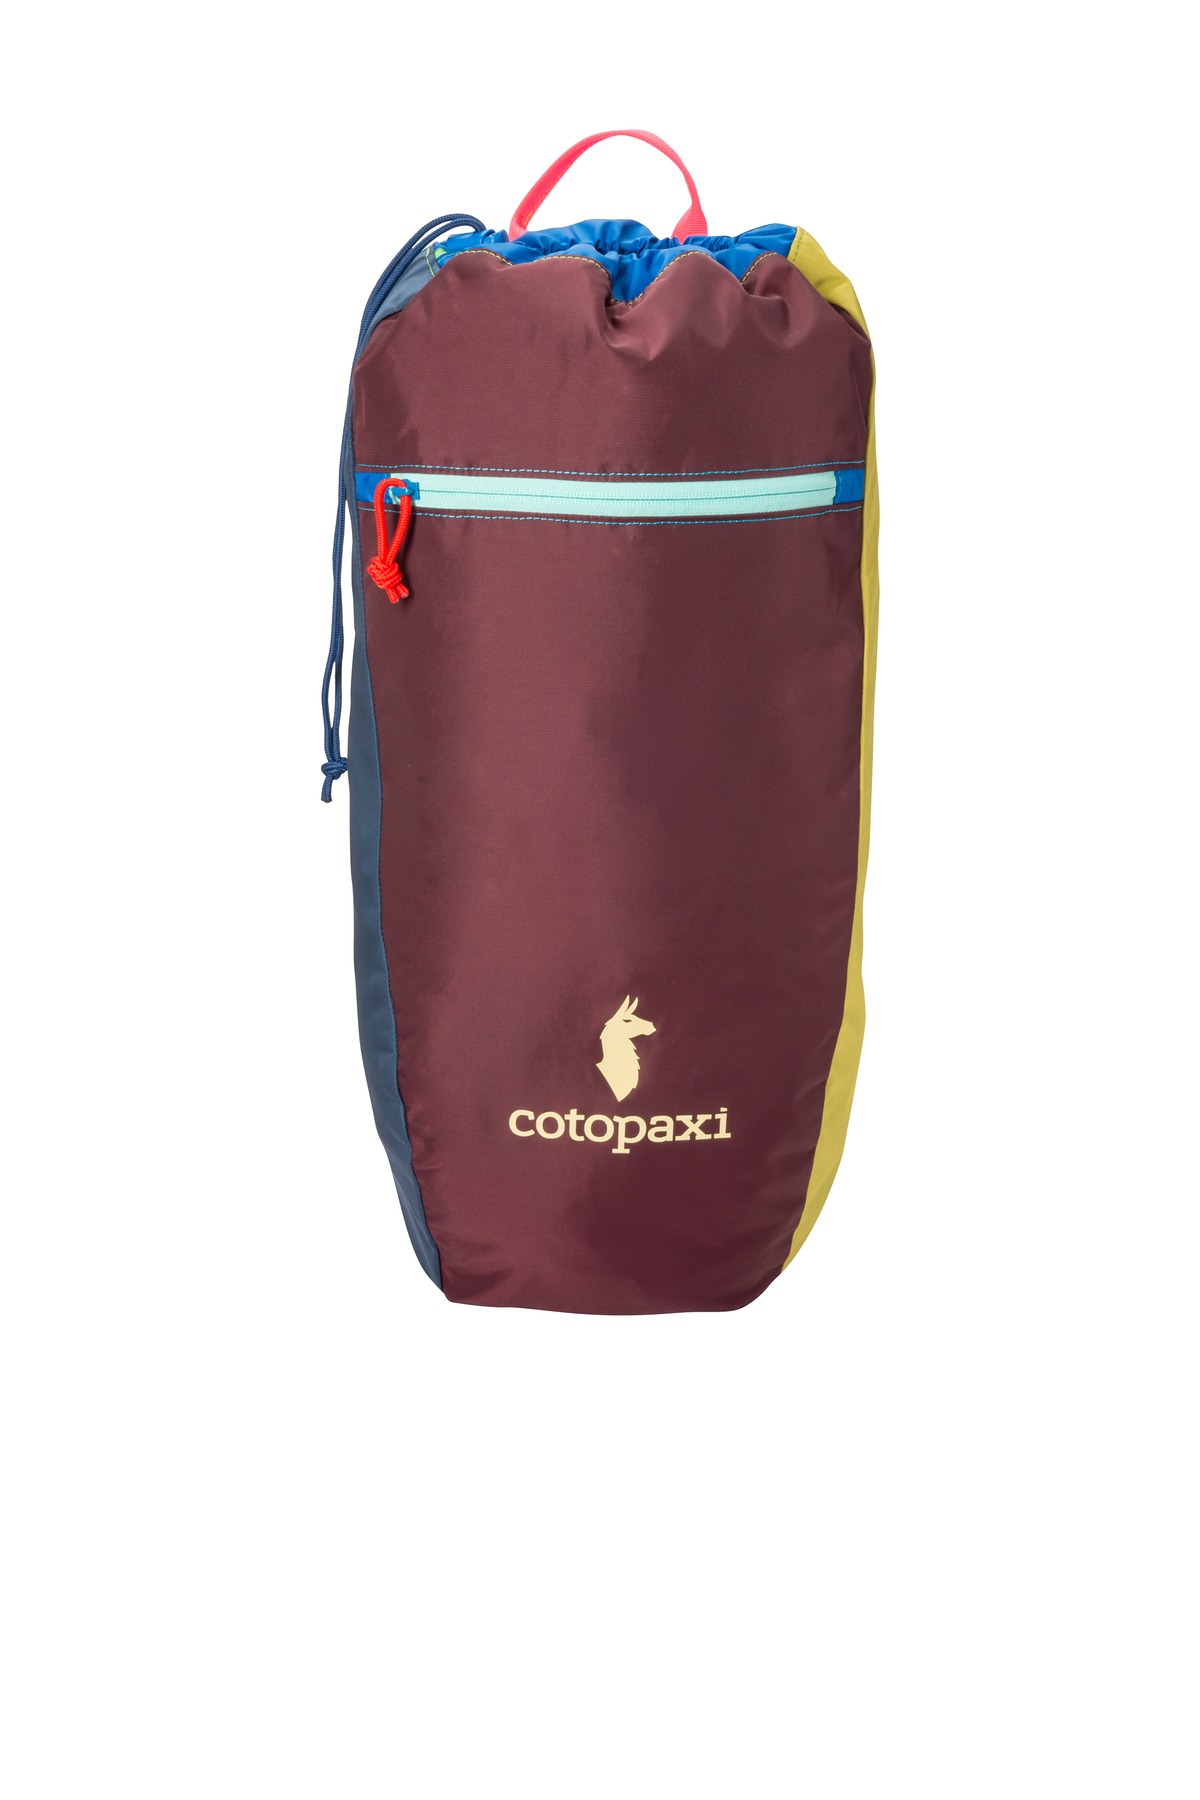 Buy Cotopaxi Luzon Backpack - Cotopaxi Online at Best price - NJ